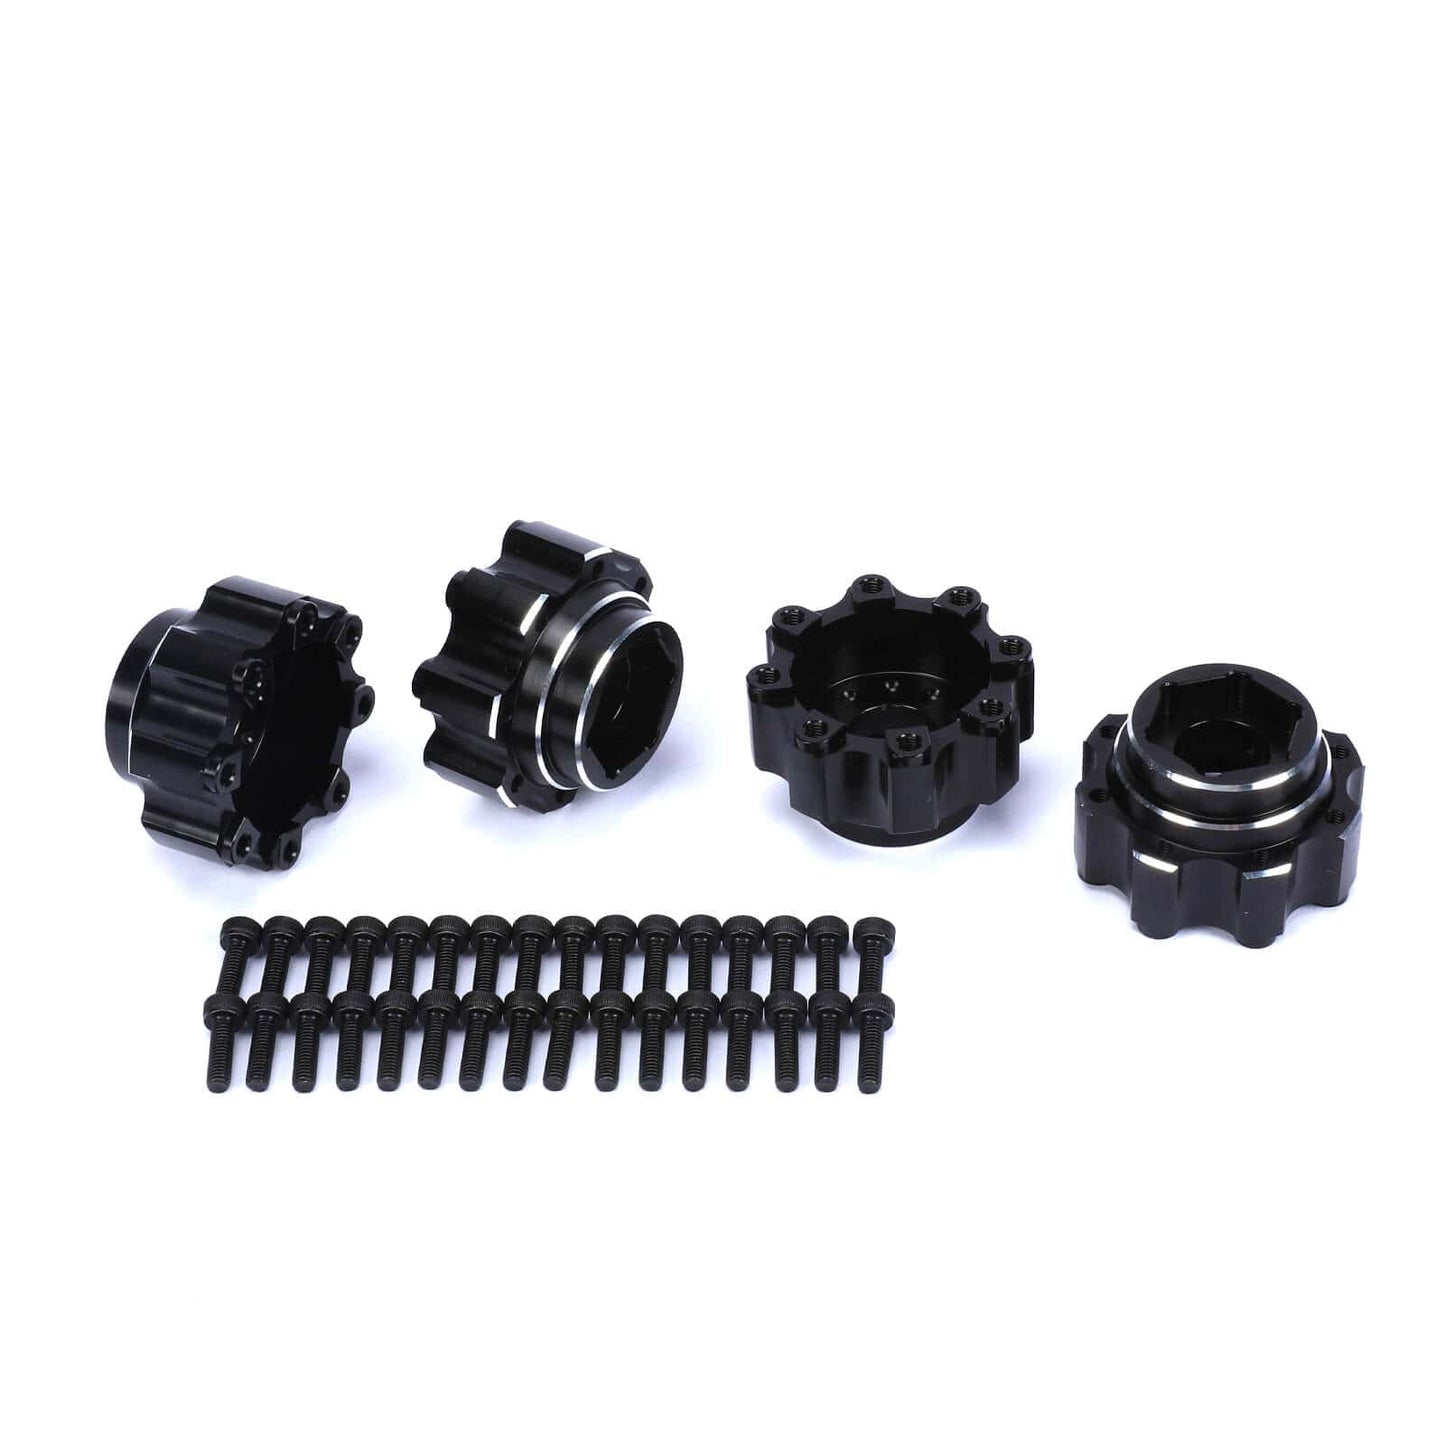 RCAWD UNIHEX UNIHEX 1/8 8x32 to 17mm 1/2" Offset Aluminum Hex Adapters for Pro-line  8x32 Wheels Black